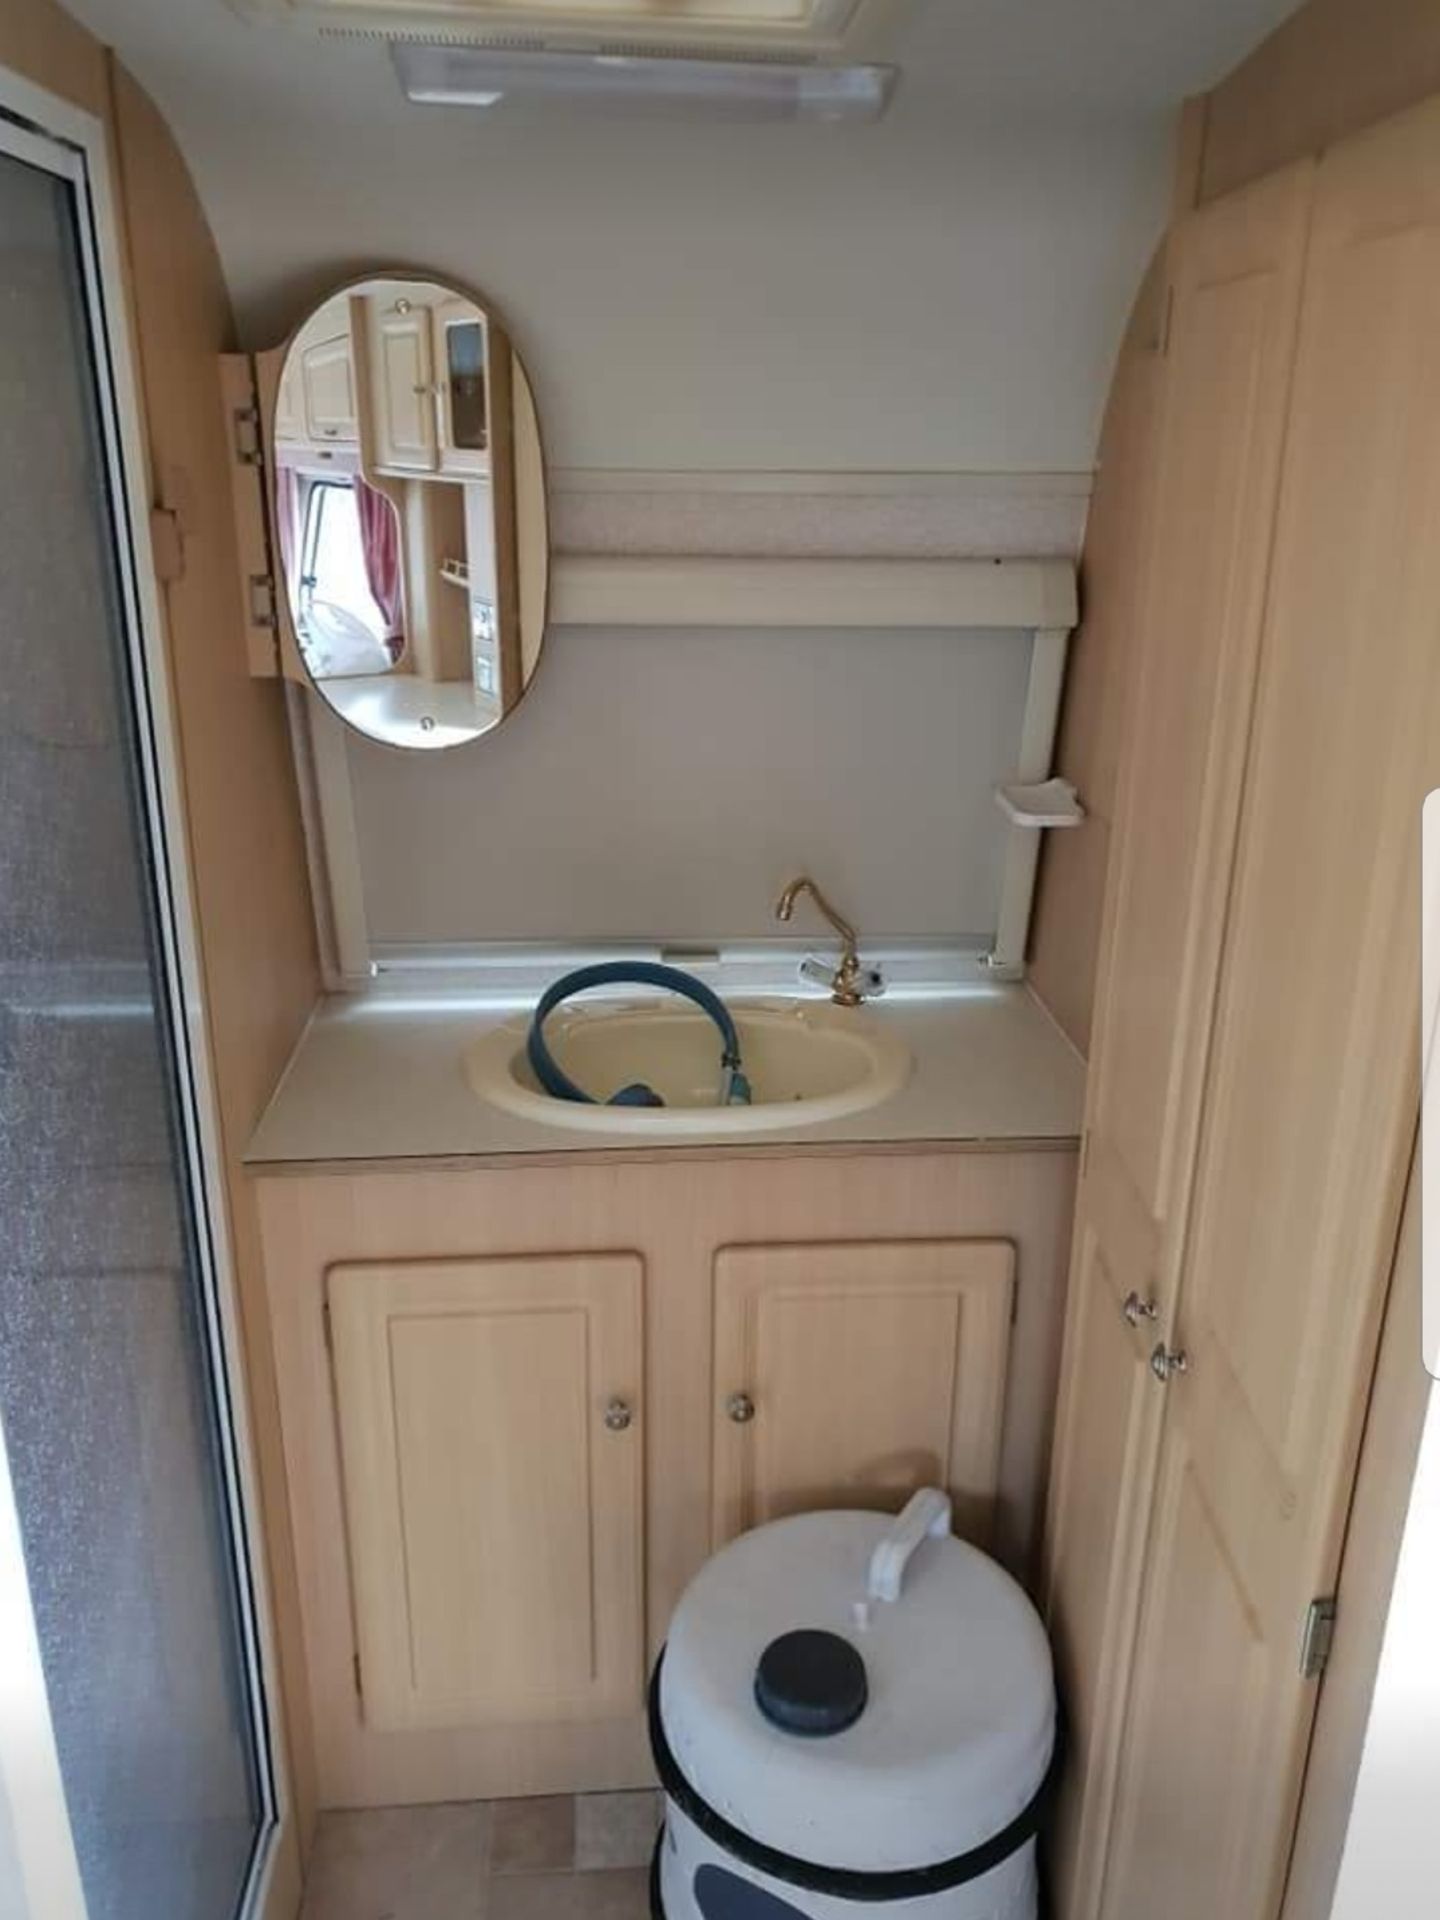 1995 FLEETWOOD COLCHESTER 1500/2E8 2 BERTH SINGLE AXLE CARAVAN, C/W AWNING AS PICTURED *NO VAT* - Image 8 of 8